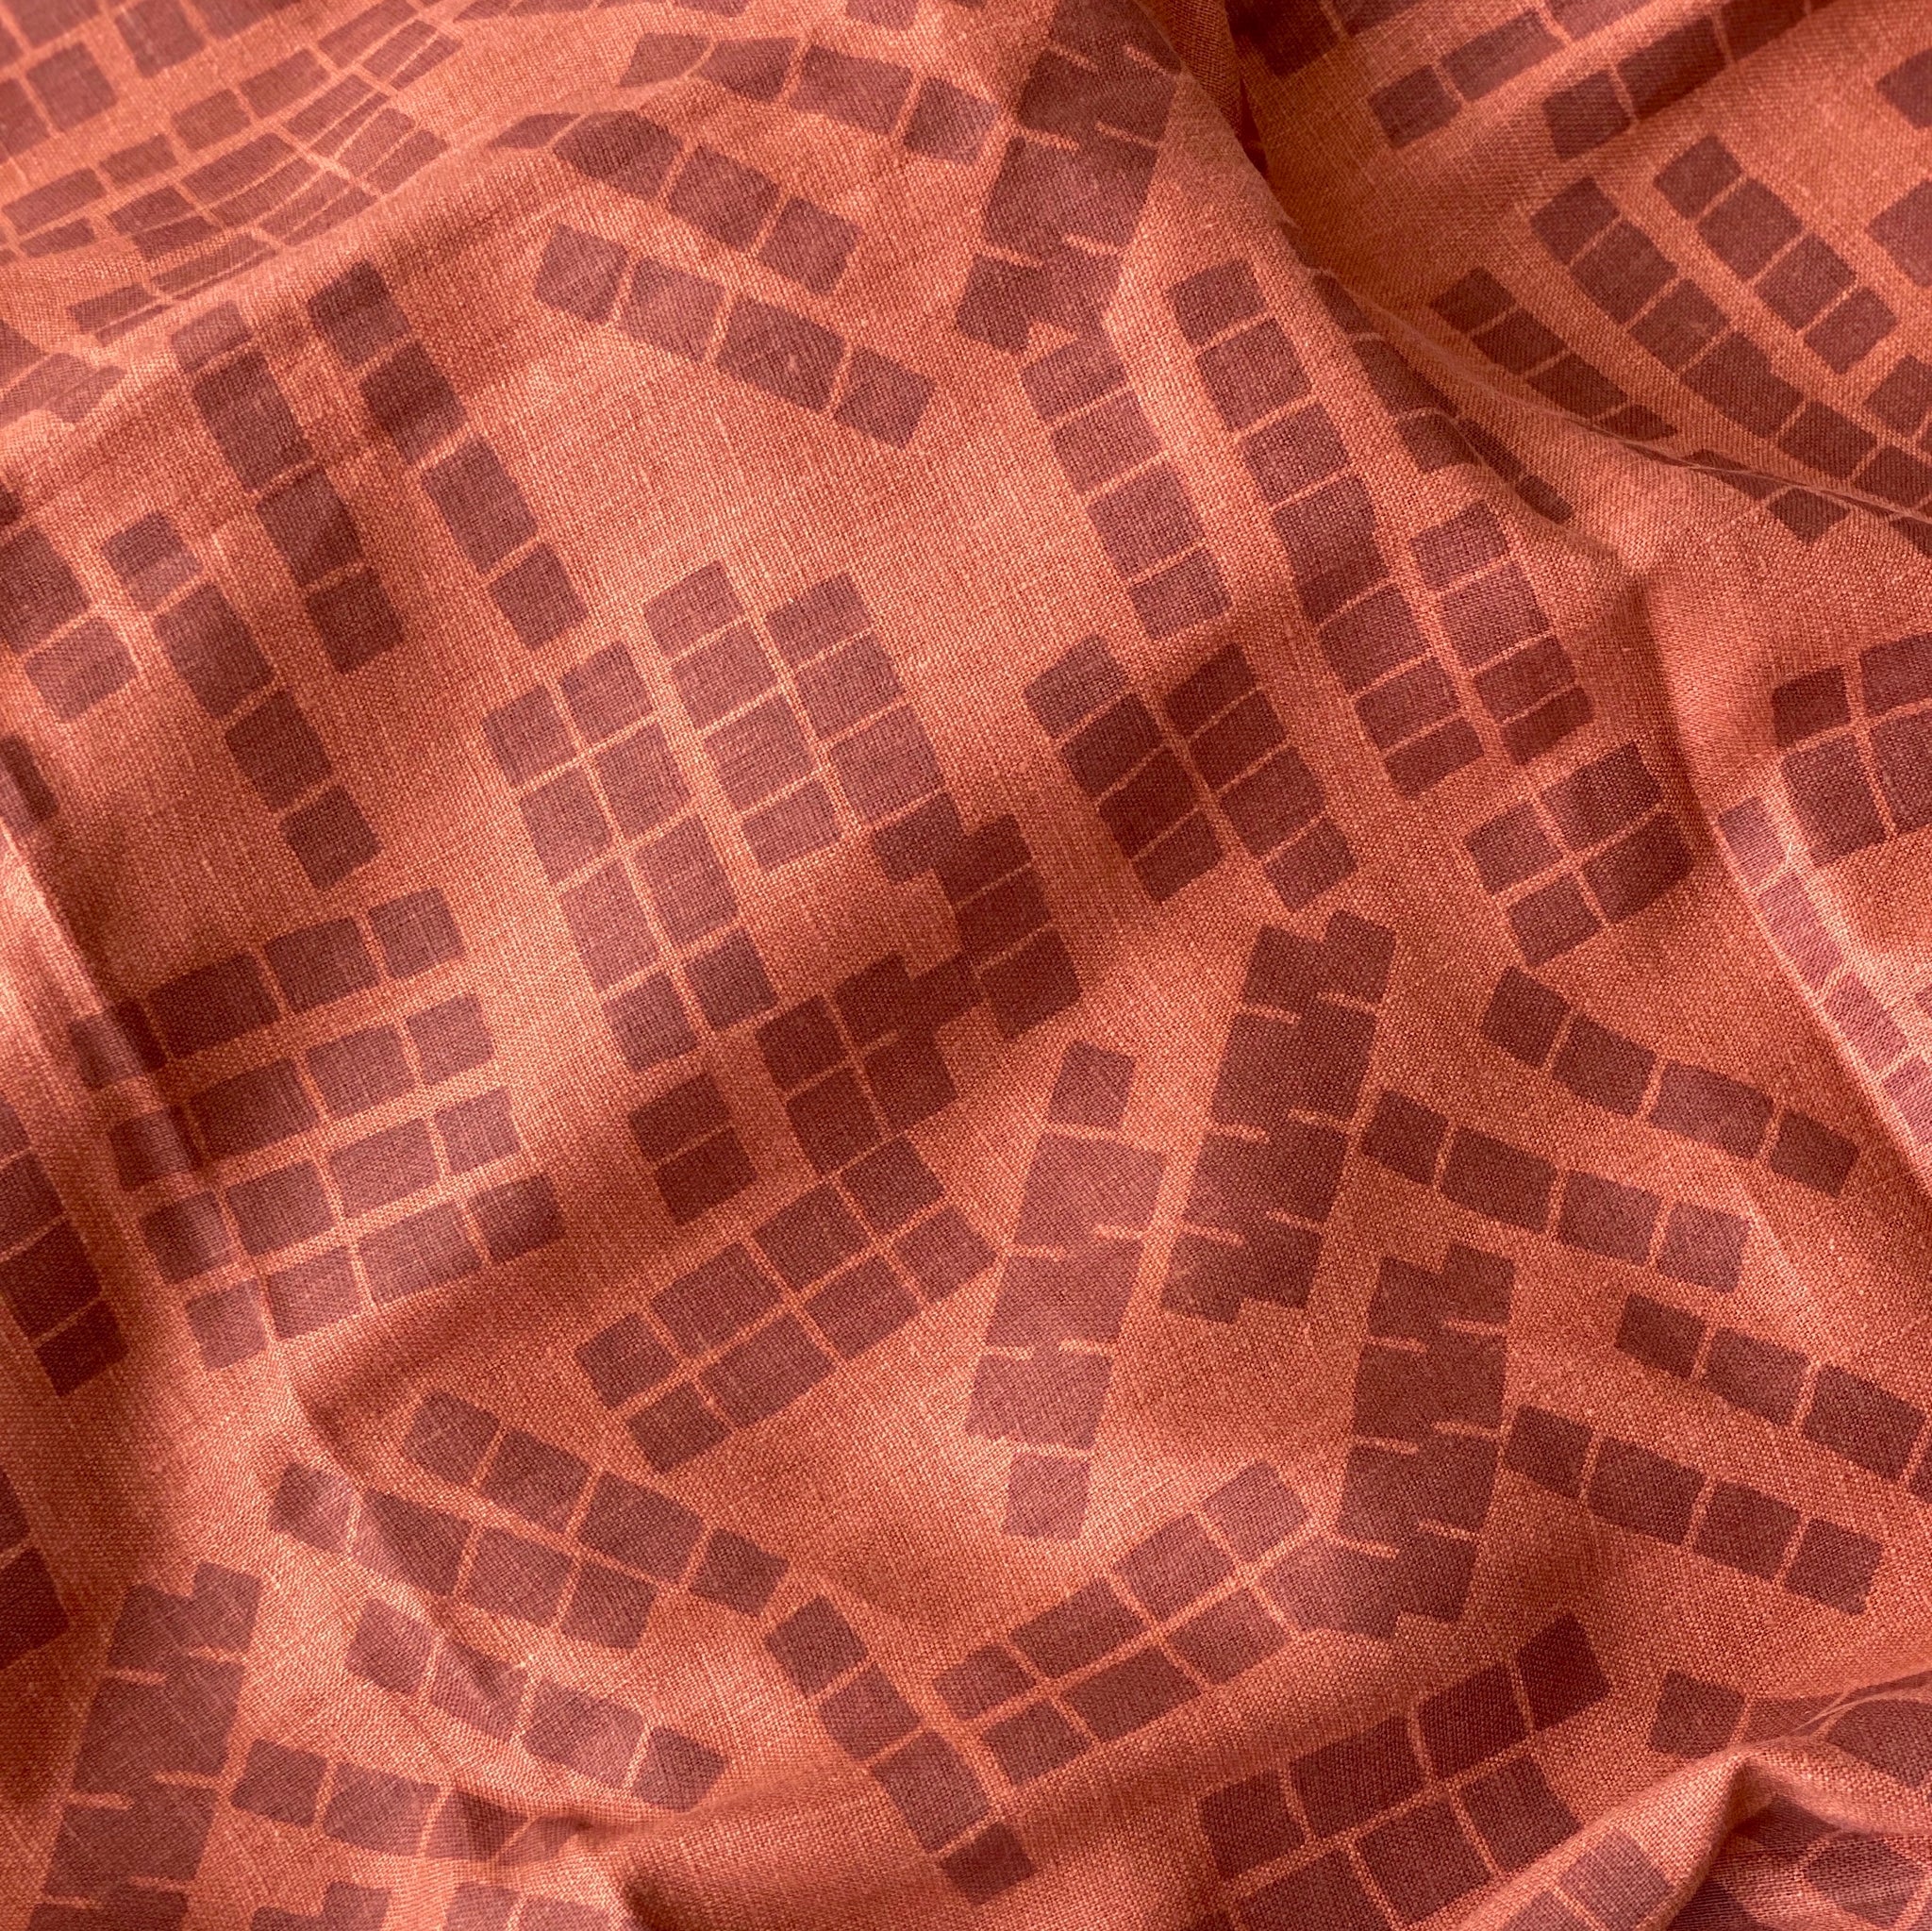 Tiles in Sky on Burnt Sienna - 100% linen - FABRIC BY THE YARD